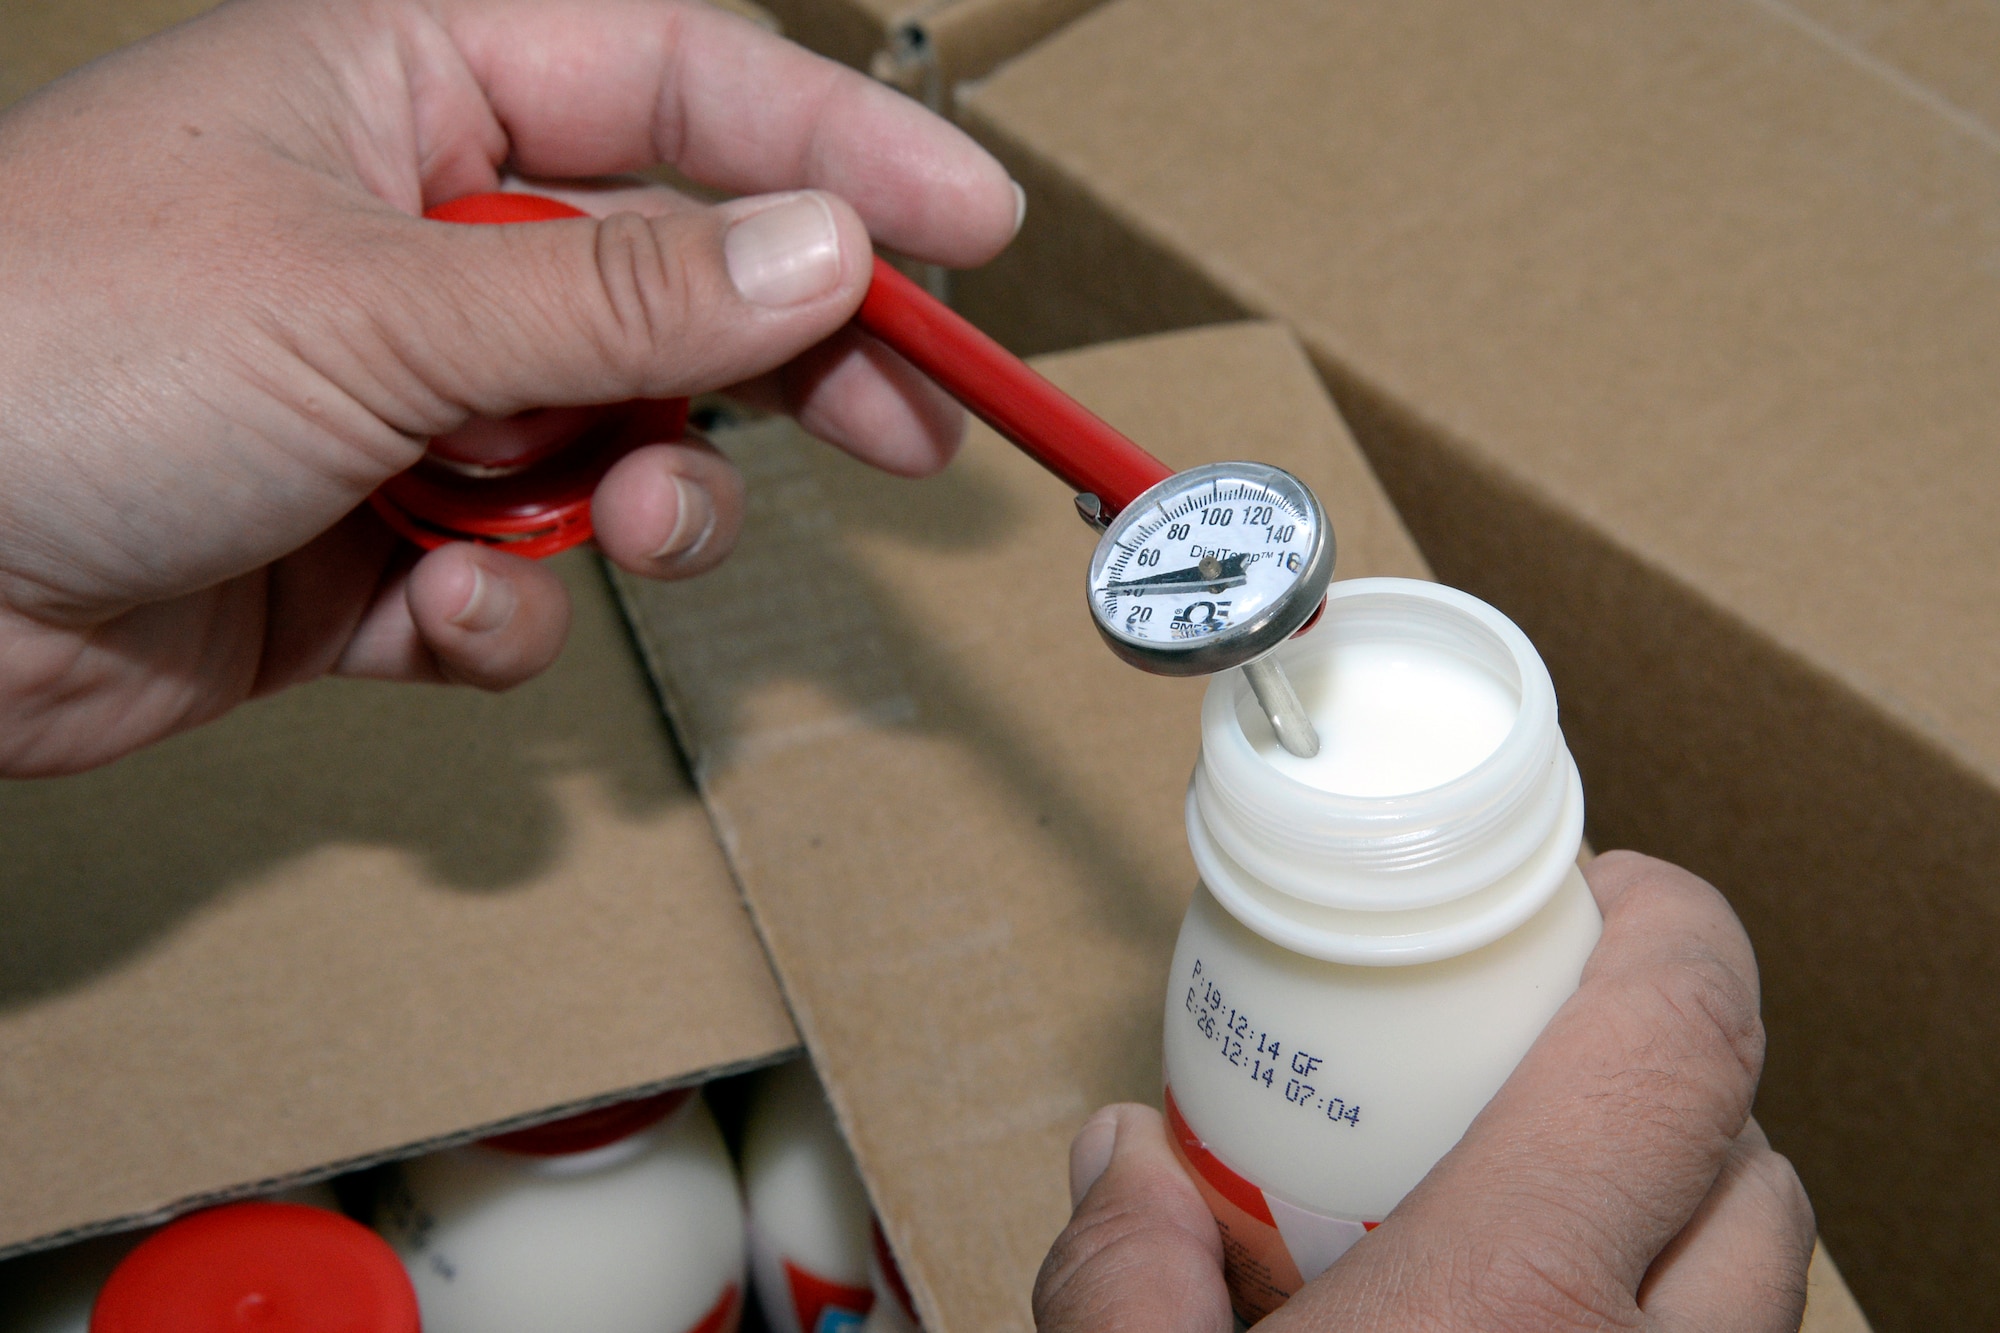 Tech. Sgt. Jenn, public health technician, tests the temperature of a bottle of milk during an inspection of the Oasis Dining Facility at an undisclosed location in Southwest Asia Dec. 23, 2014. The public health team inspects food temperatures and preparation as well as food and public facilities for safety reasons. Jenn is currently deployed from Offut Air Force Base, Neb., and is a native of Vallejo, Calif. (U.S. Air Force photo/Tech. Sgt. Marie Brown)